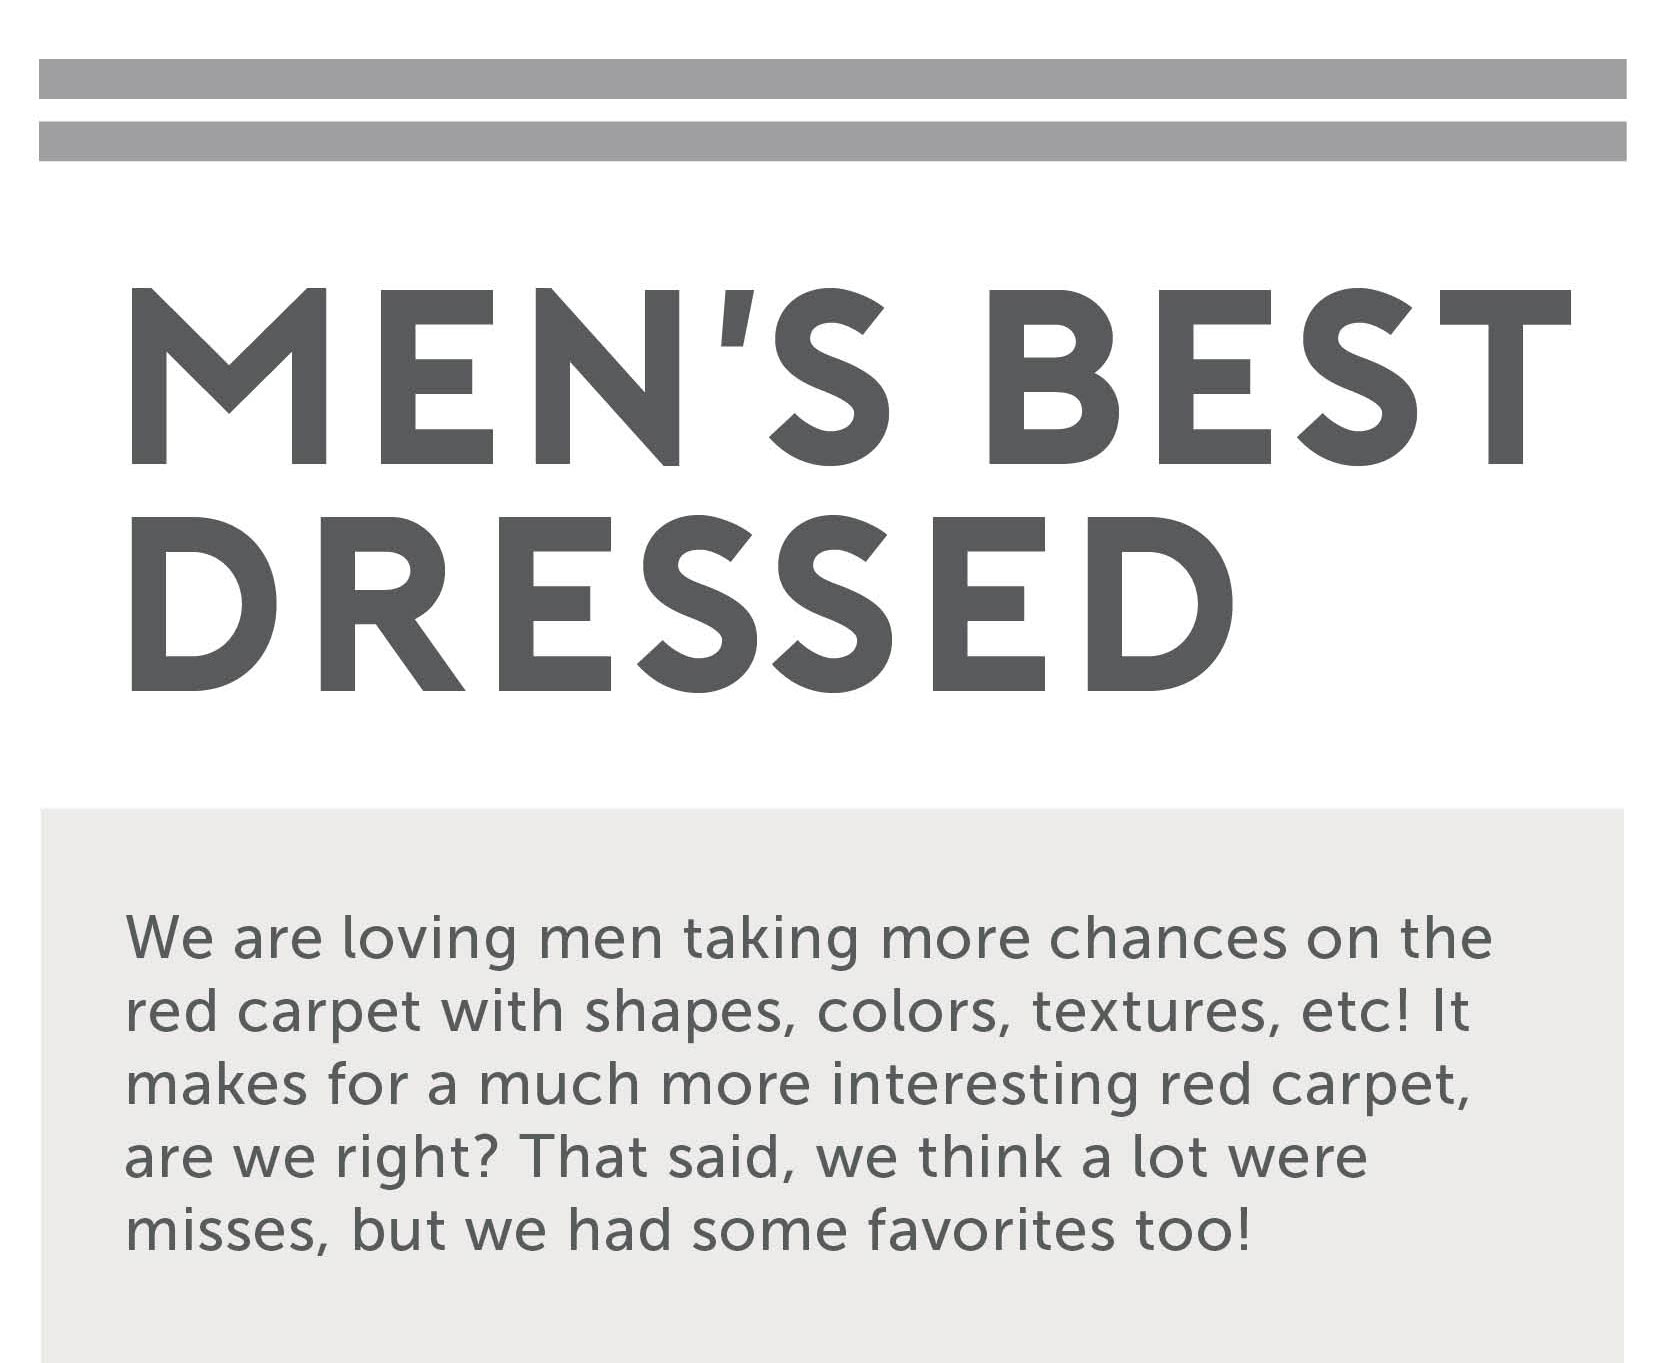 Men’s Best Dressed We are loving men taking more chances on the red carpet with shapes, colors, textures, etc! It makes for a much more interesting red carpet, are we right? That said, we think a lot were misses, but we had some favorites too! 